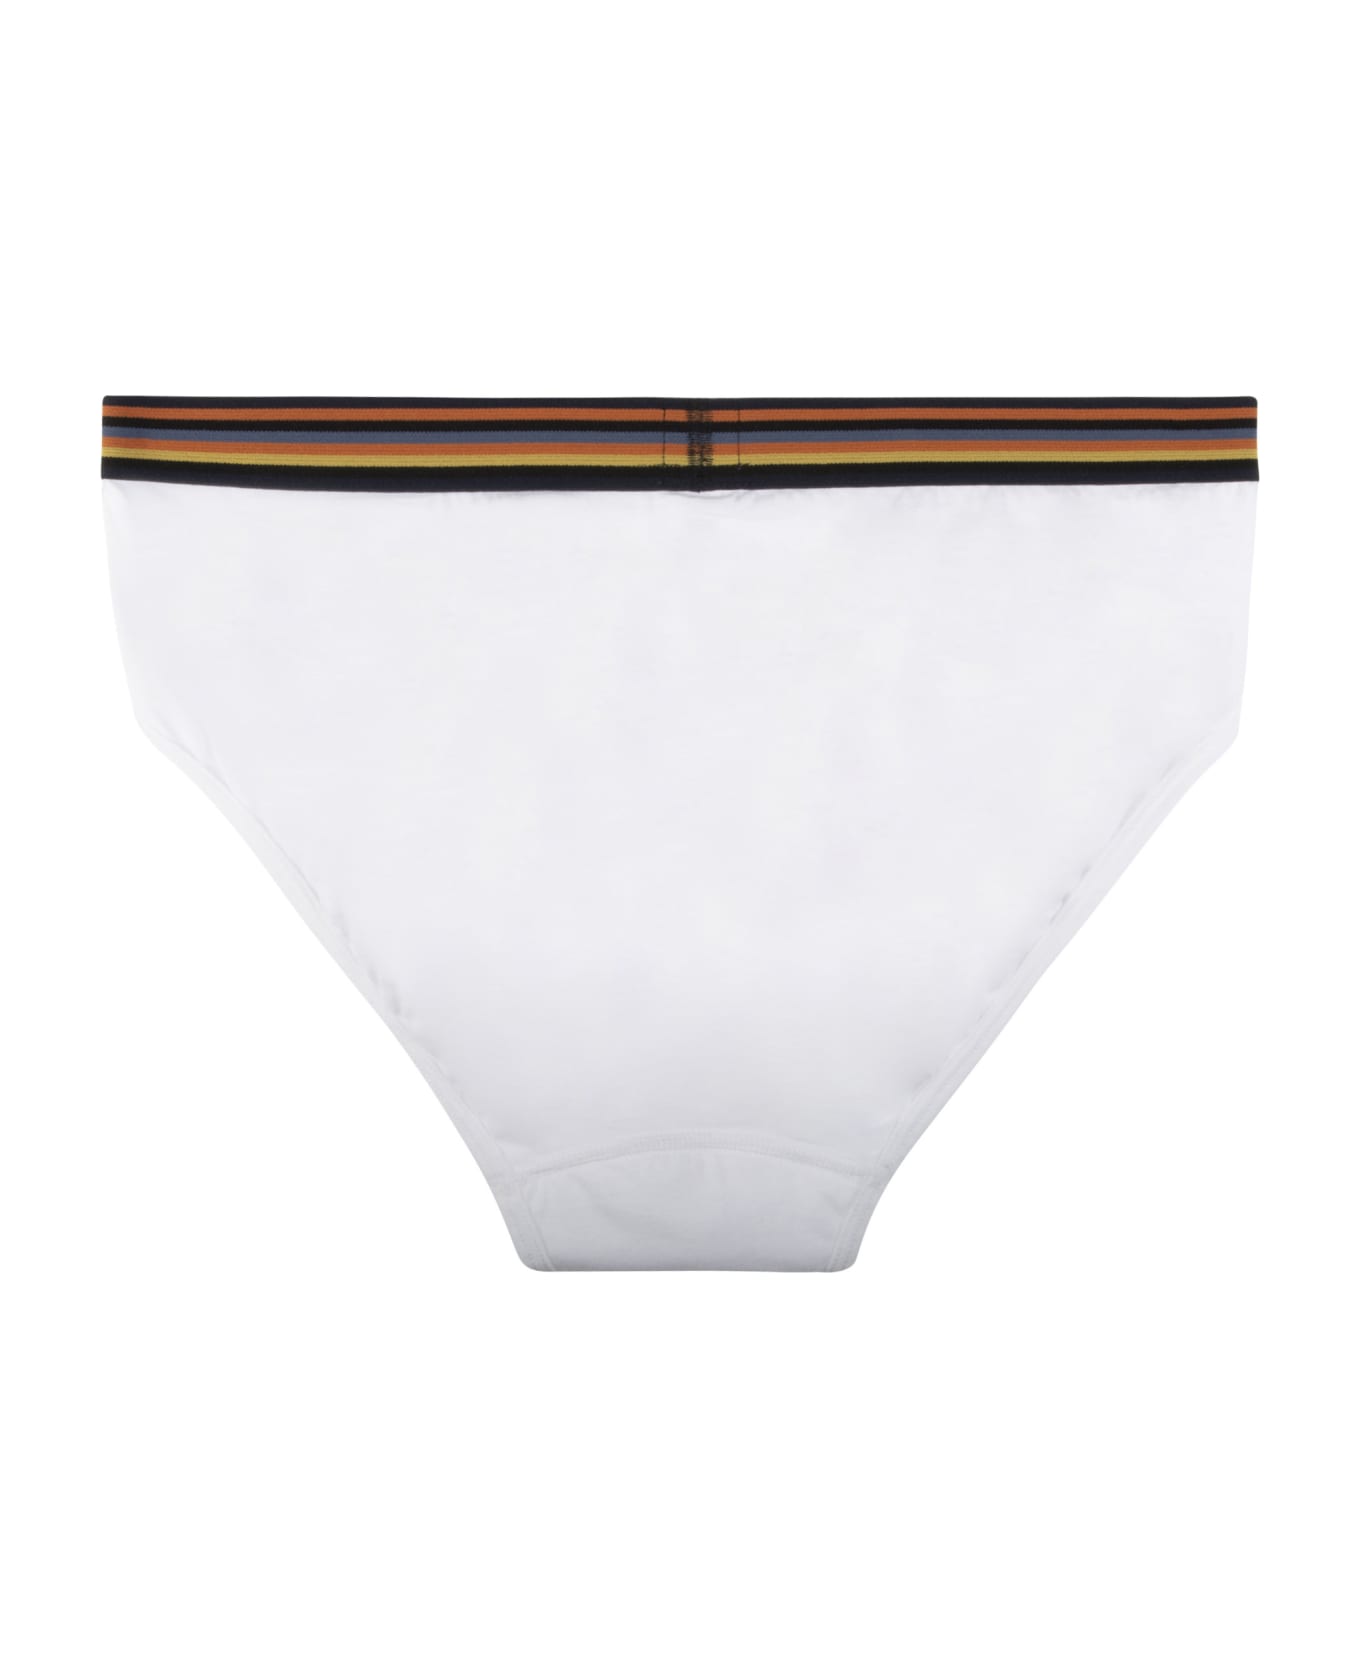 Paul Smith Artist Stripe Cotton Briefs With Elastic Band - White